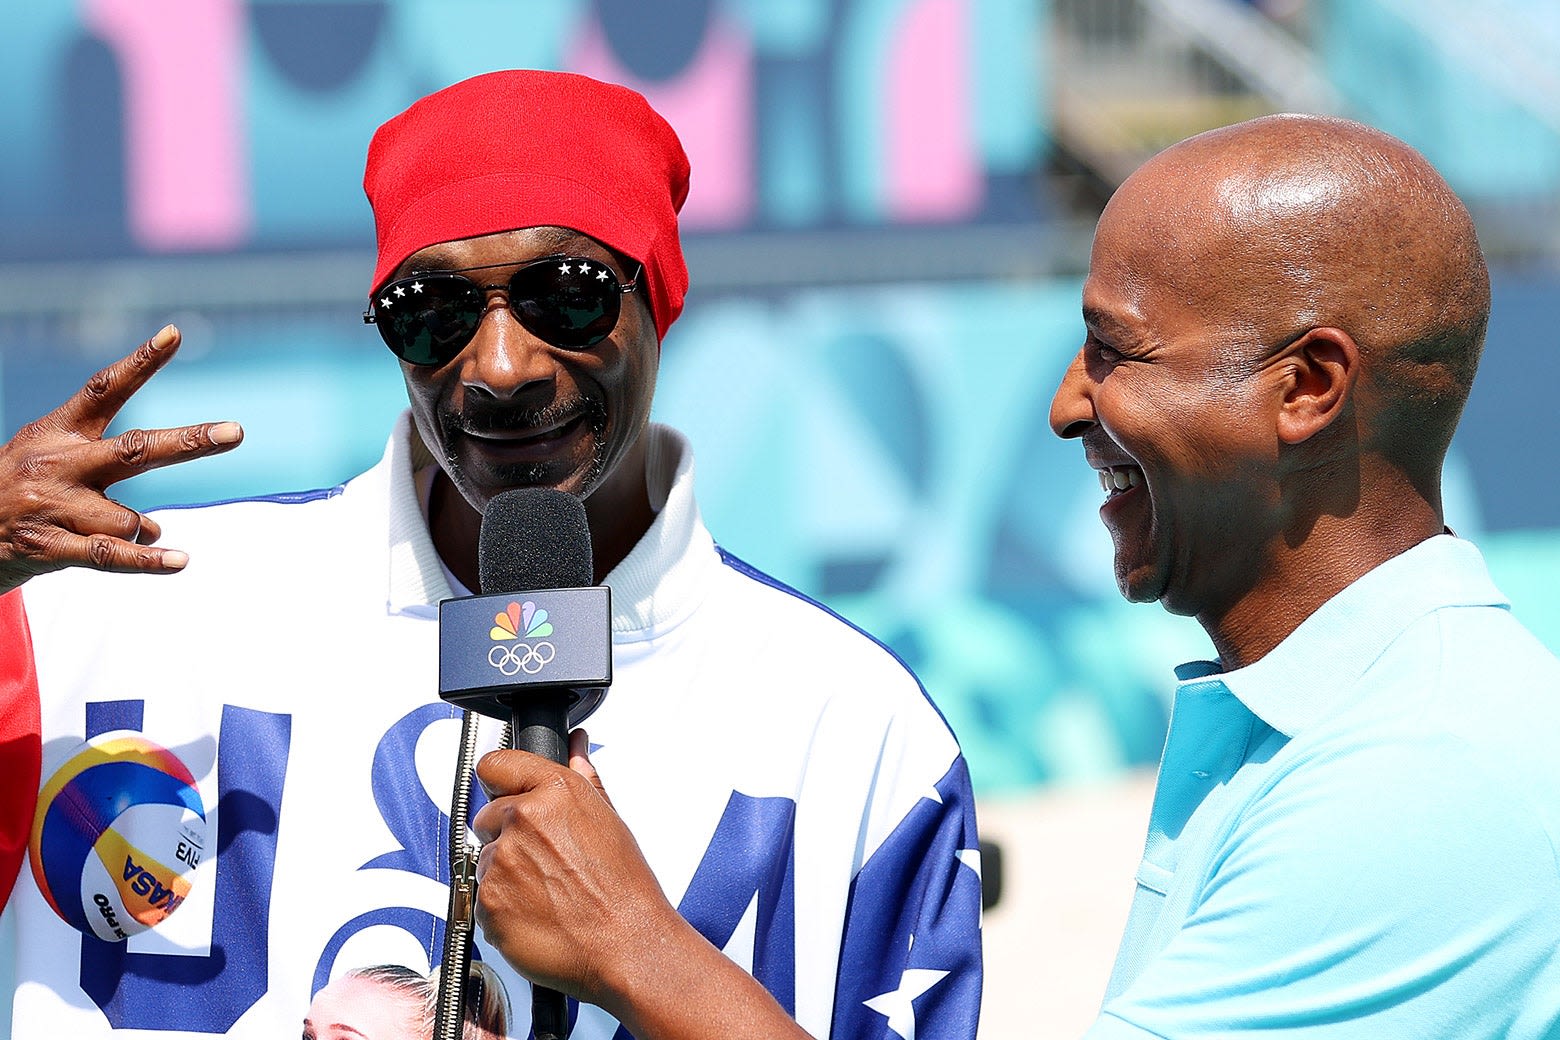 Why Did It Take NBC 30 Years to Send Snoop Dogg to the Olympics?